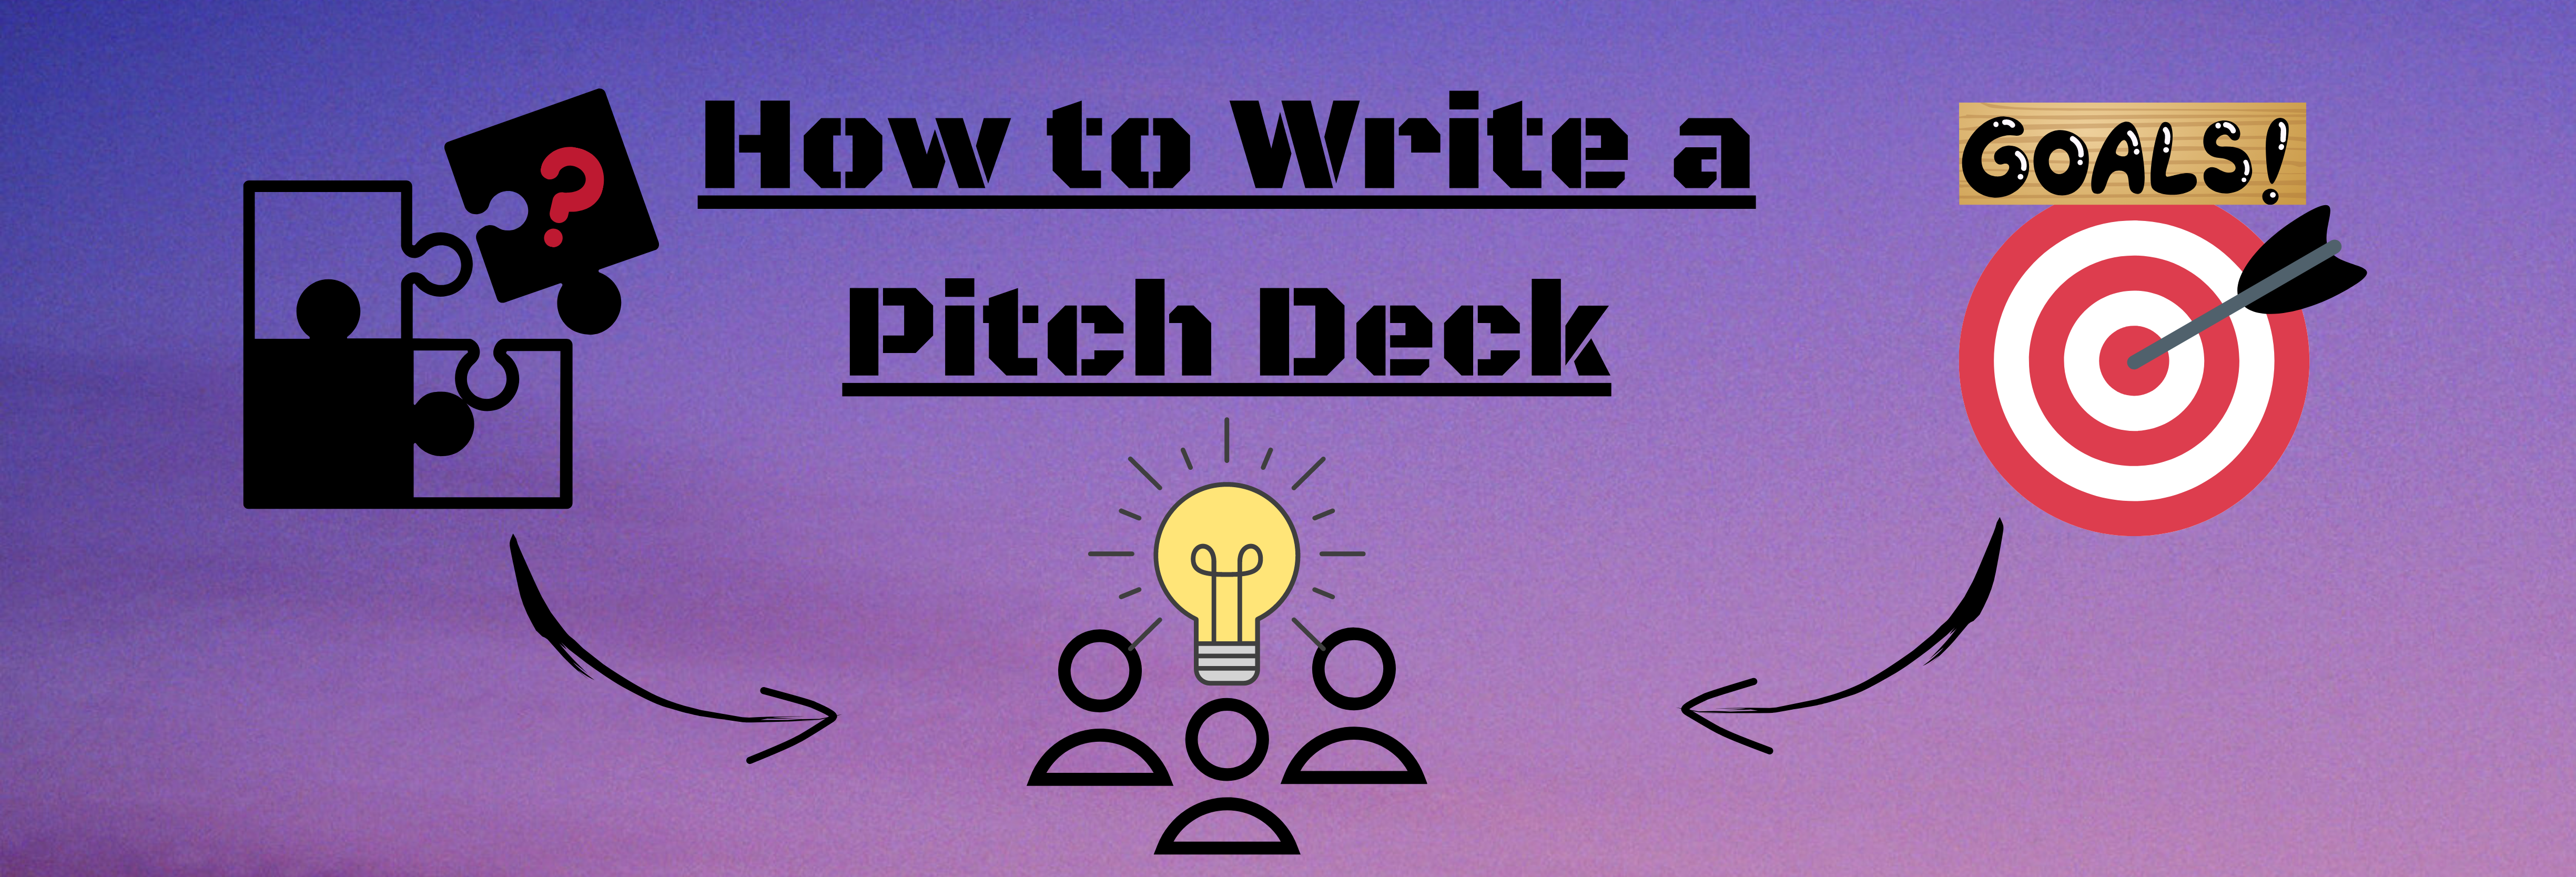 Slide Image of How to Write a Pitch